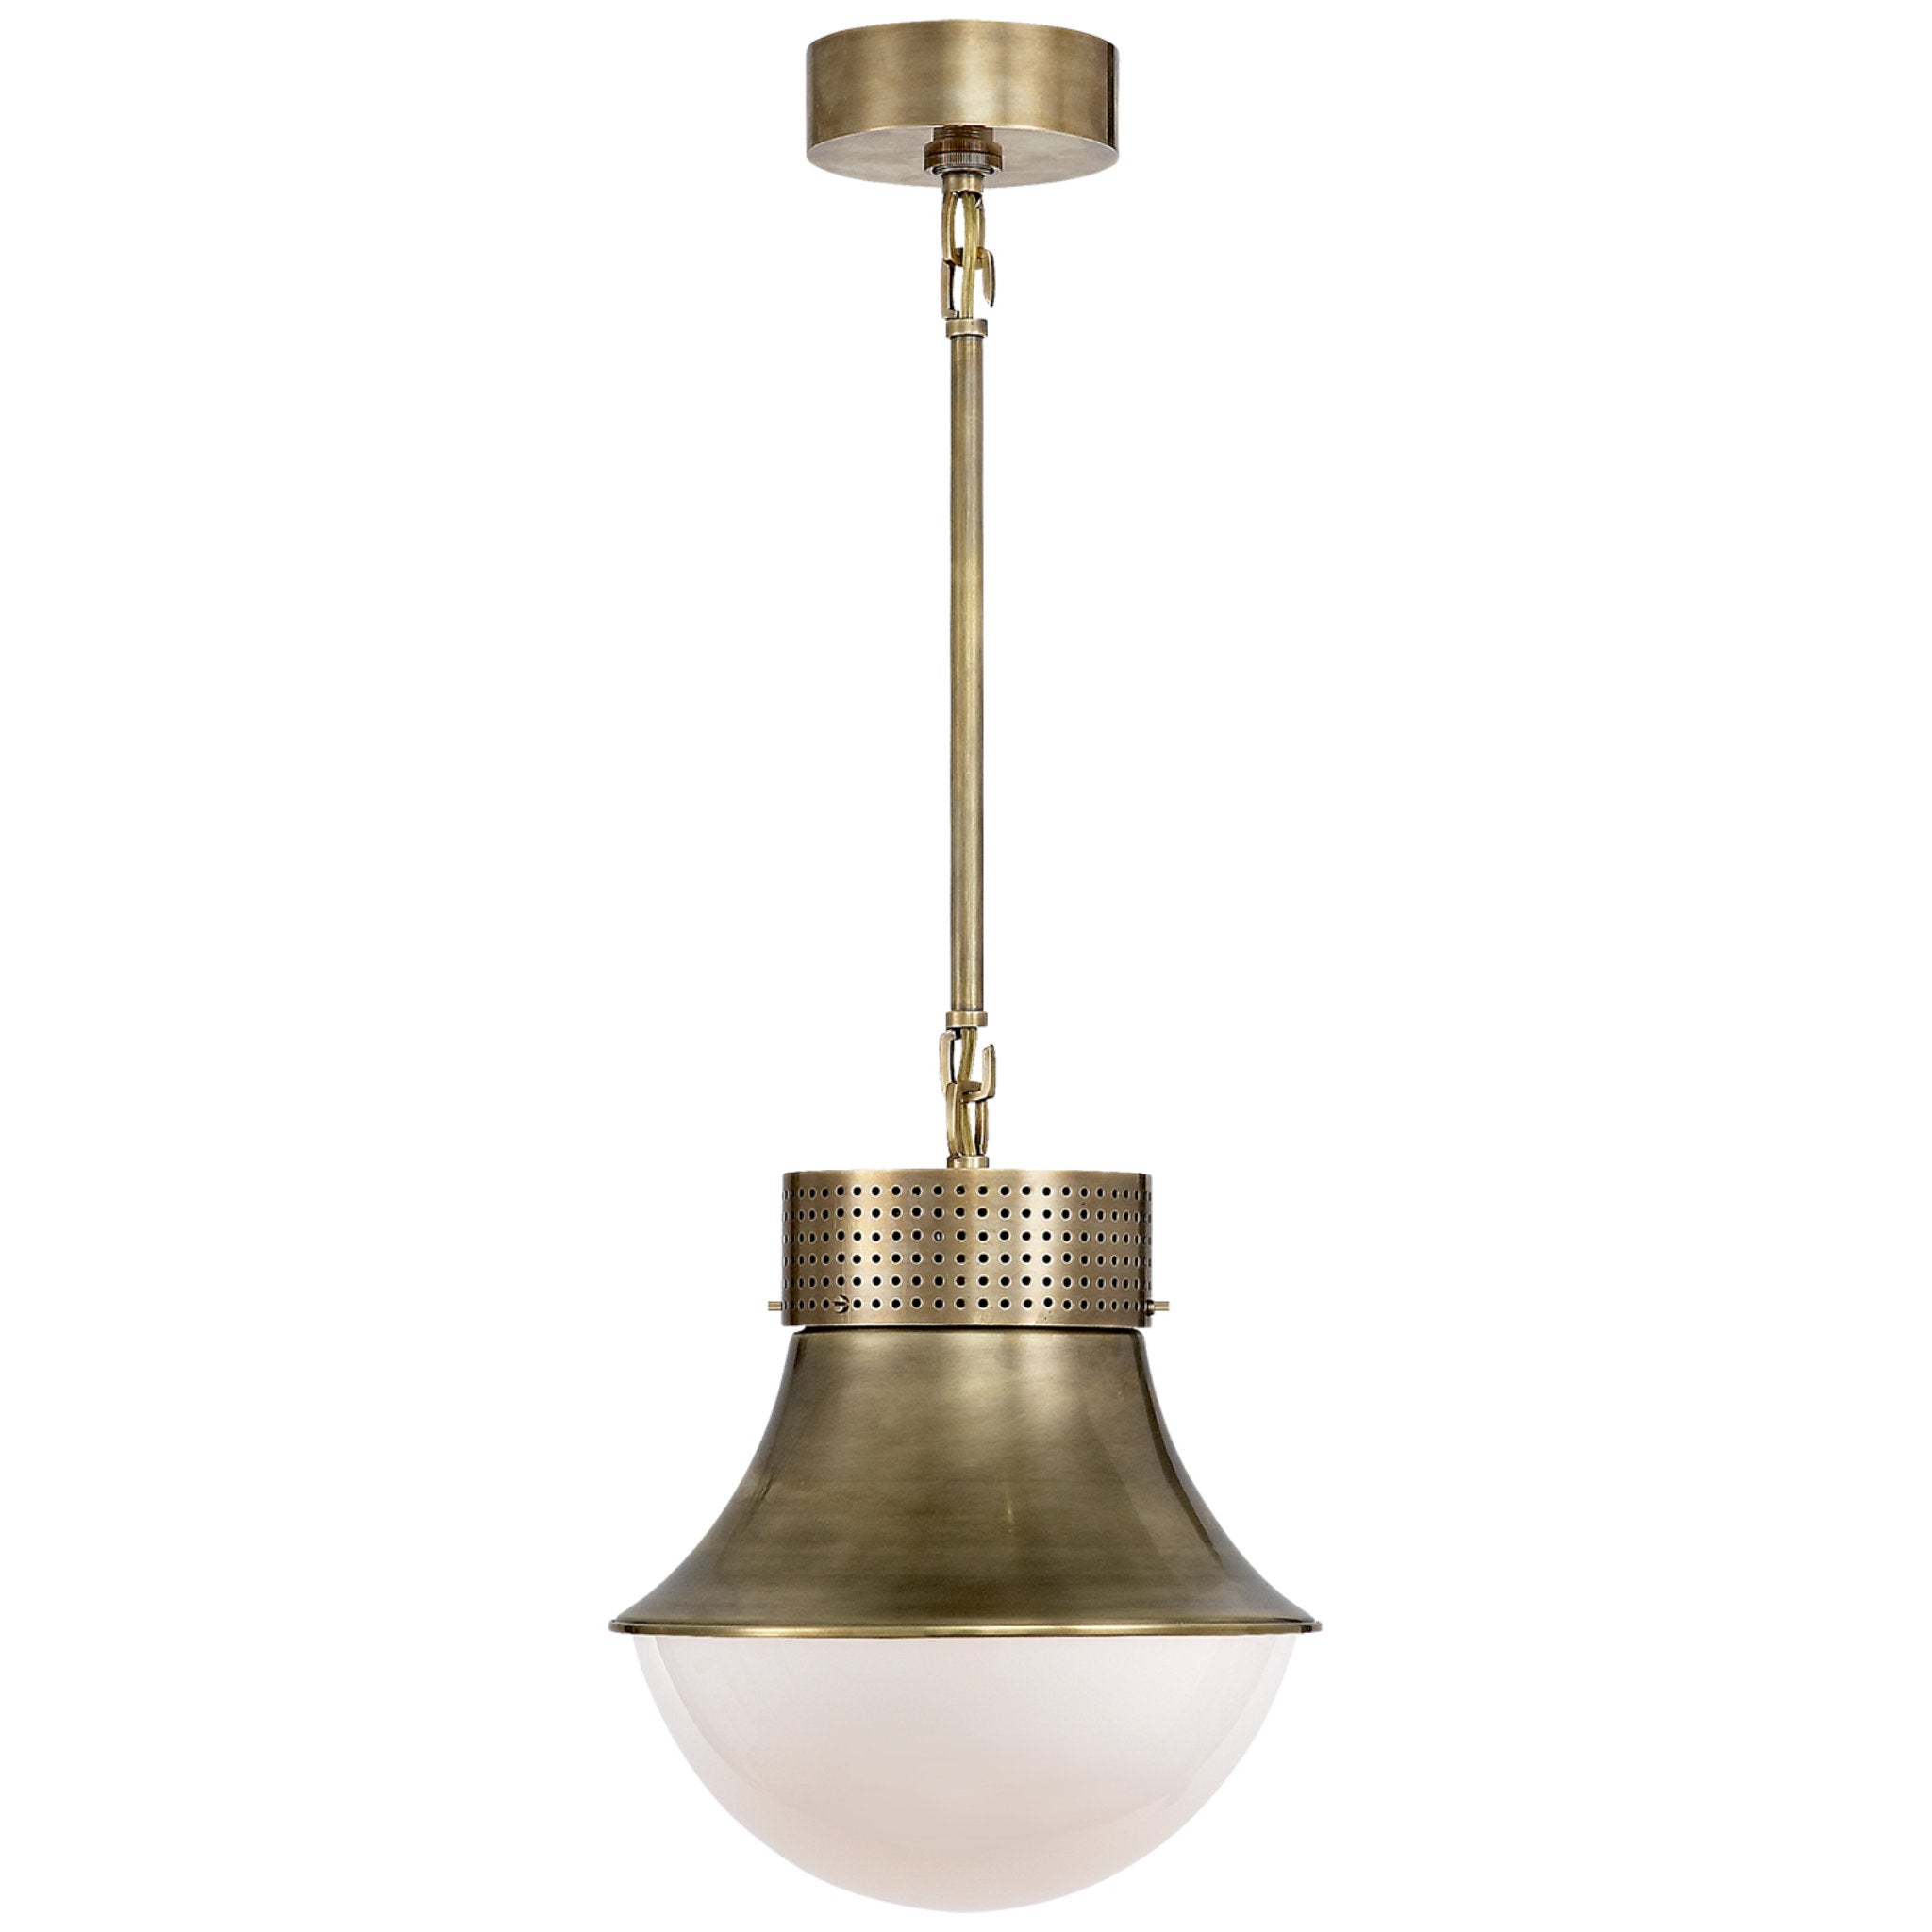 Kelly Wearstler Precision Small Pendant in Antique-Burnished Brass wit